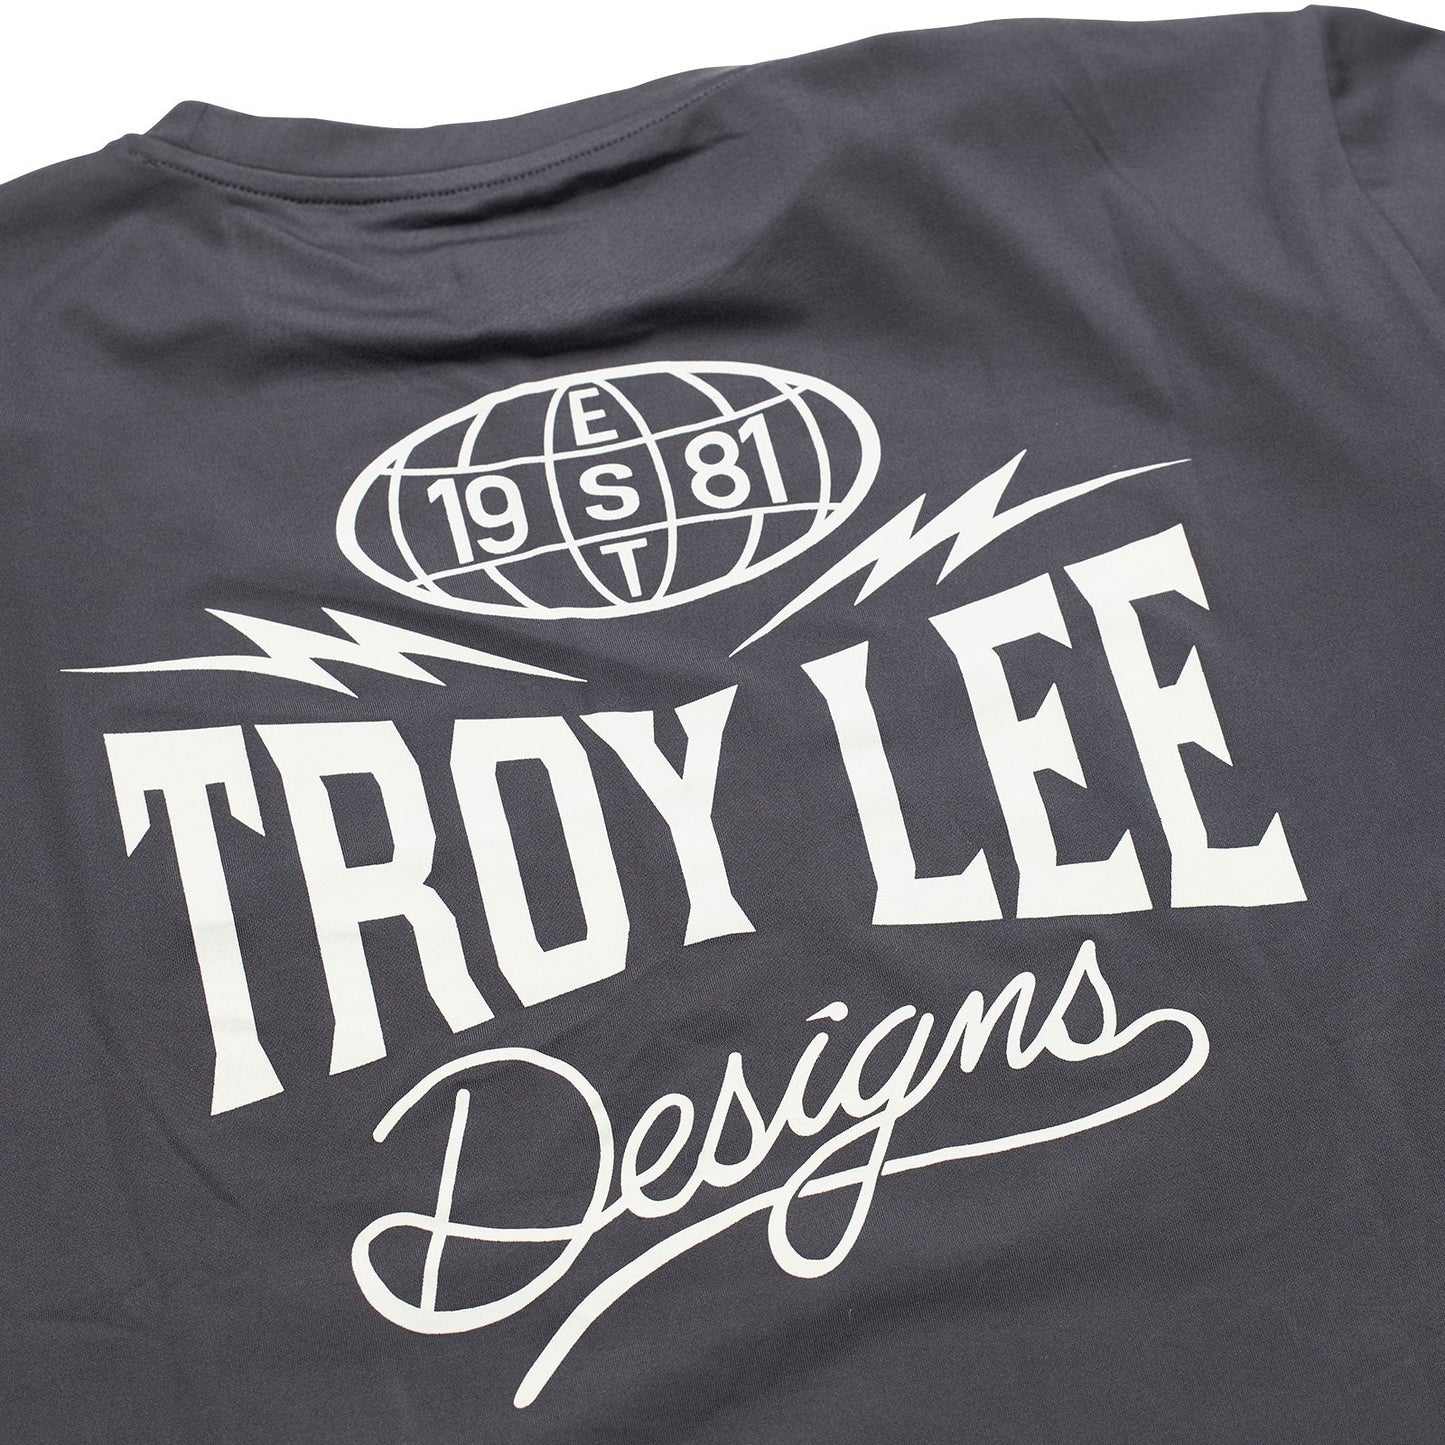 Troy Lee Ruckus Long Sleeve Ride Tee Bolts Carbon